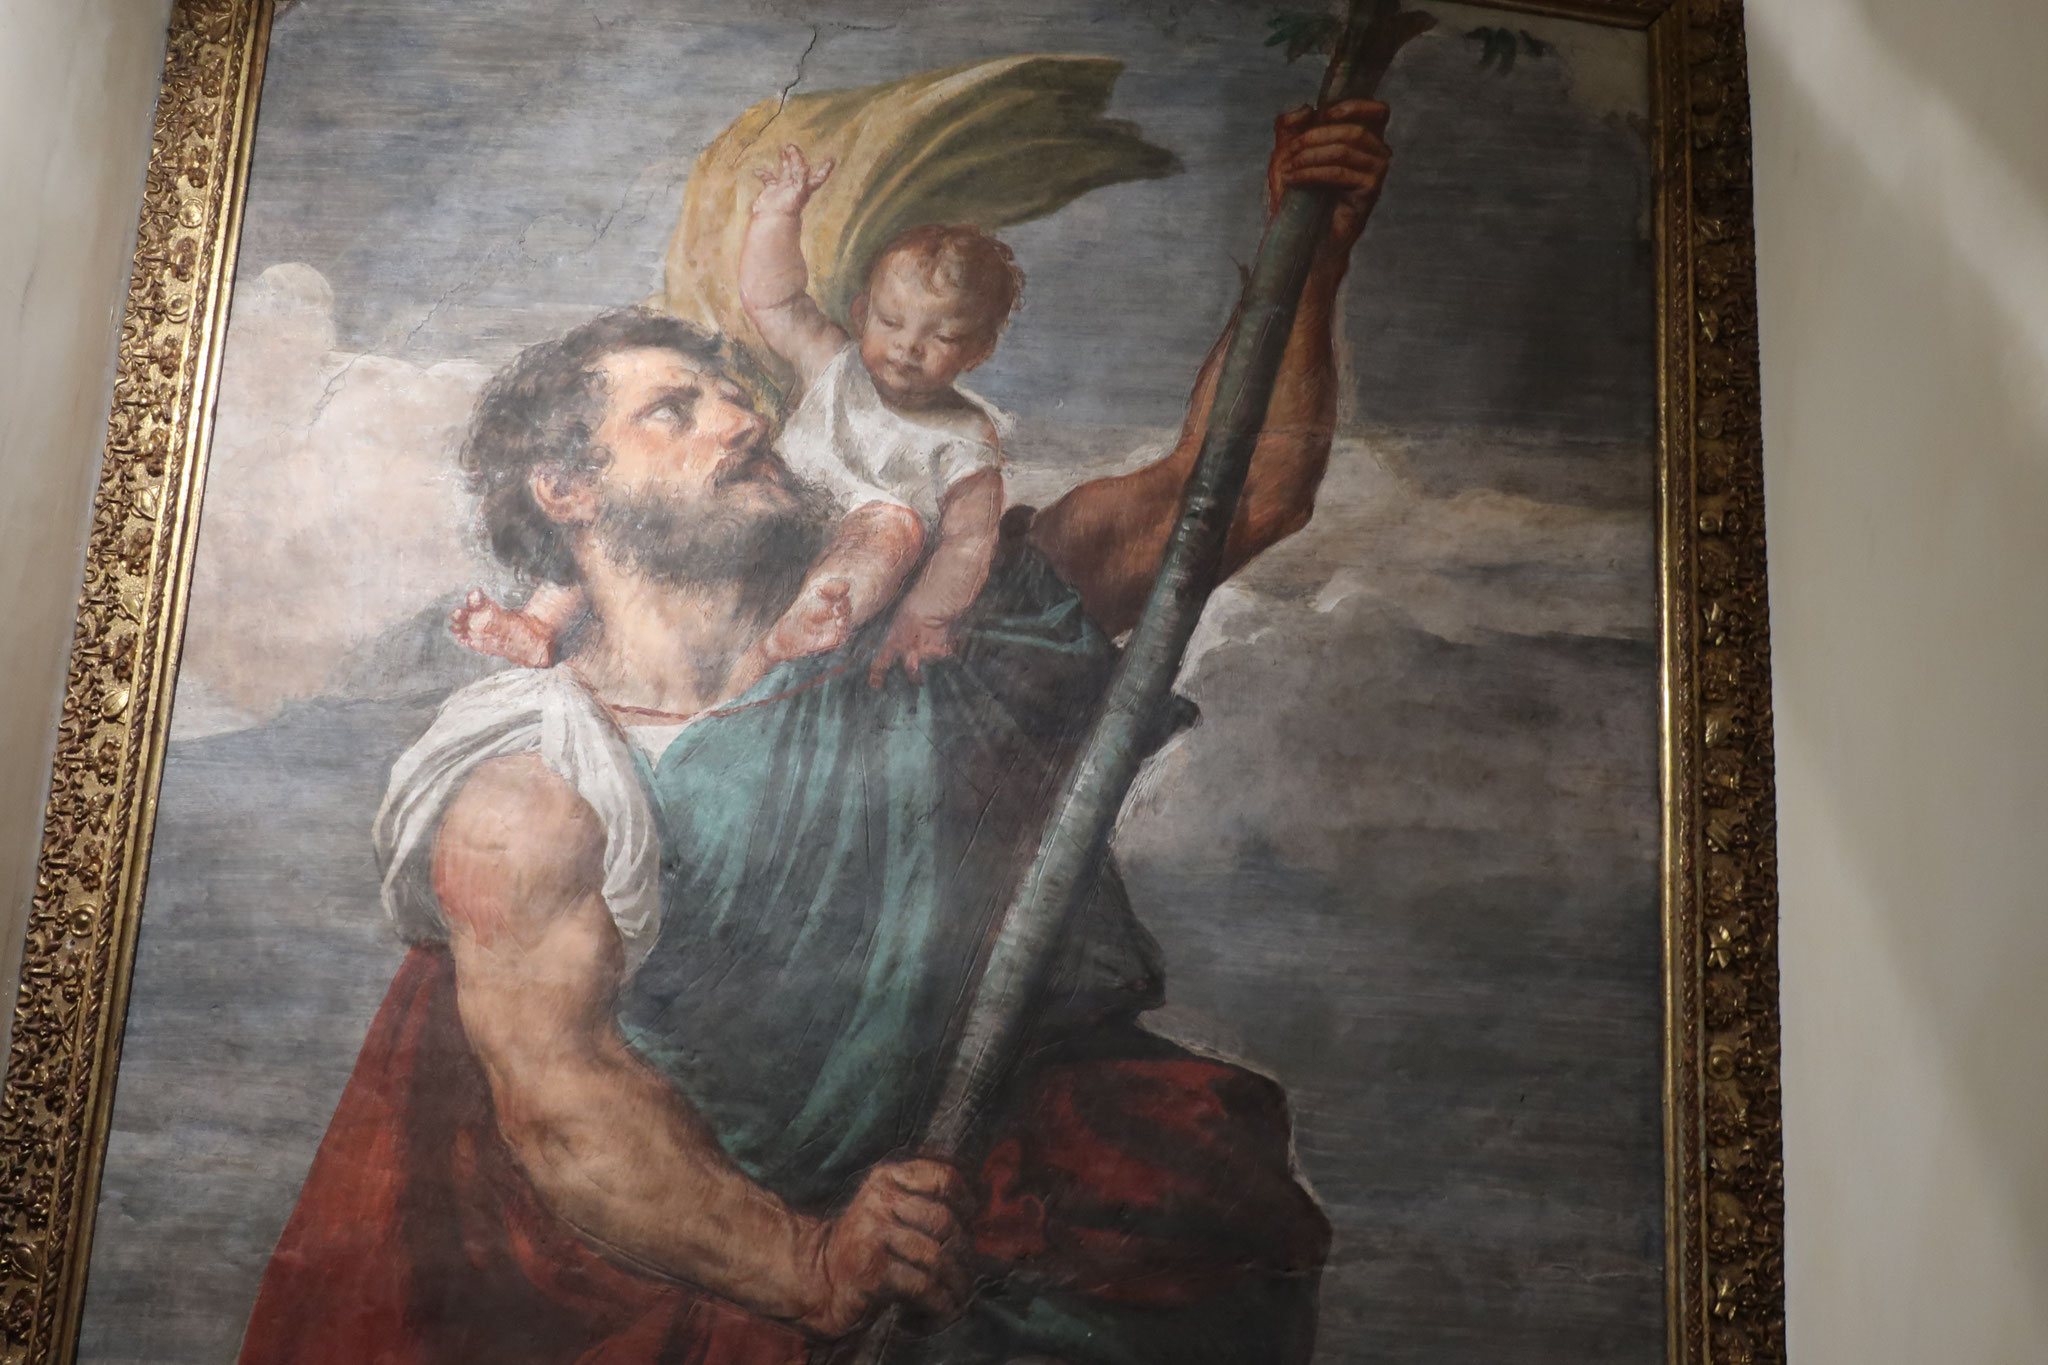 The fresco painting by Titian, "St. Christopher Crossing the Swollen River" 